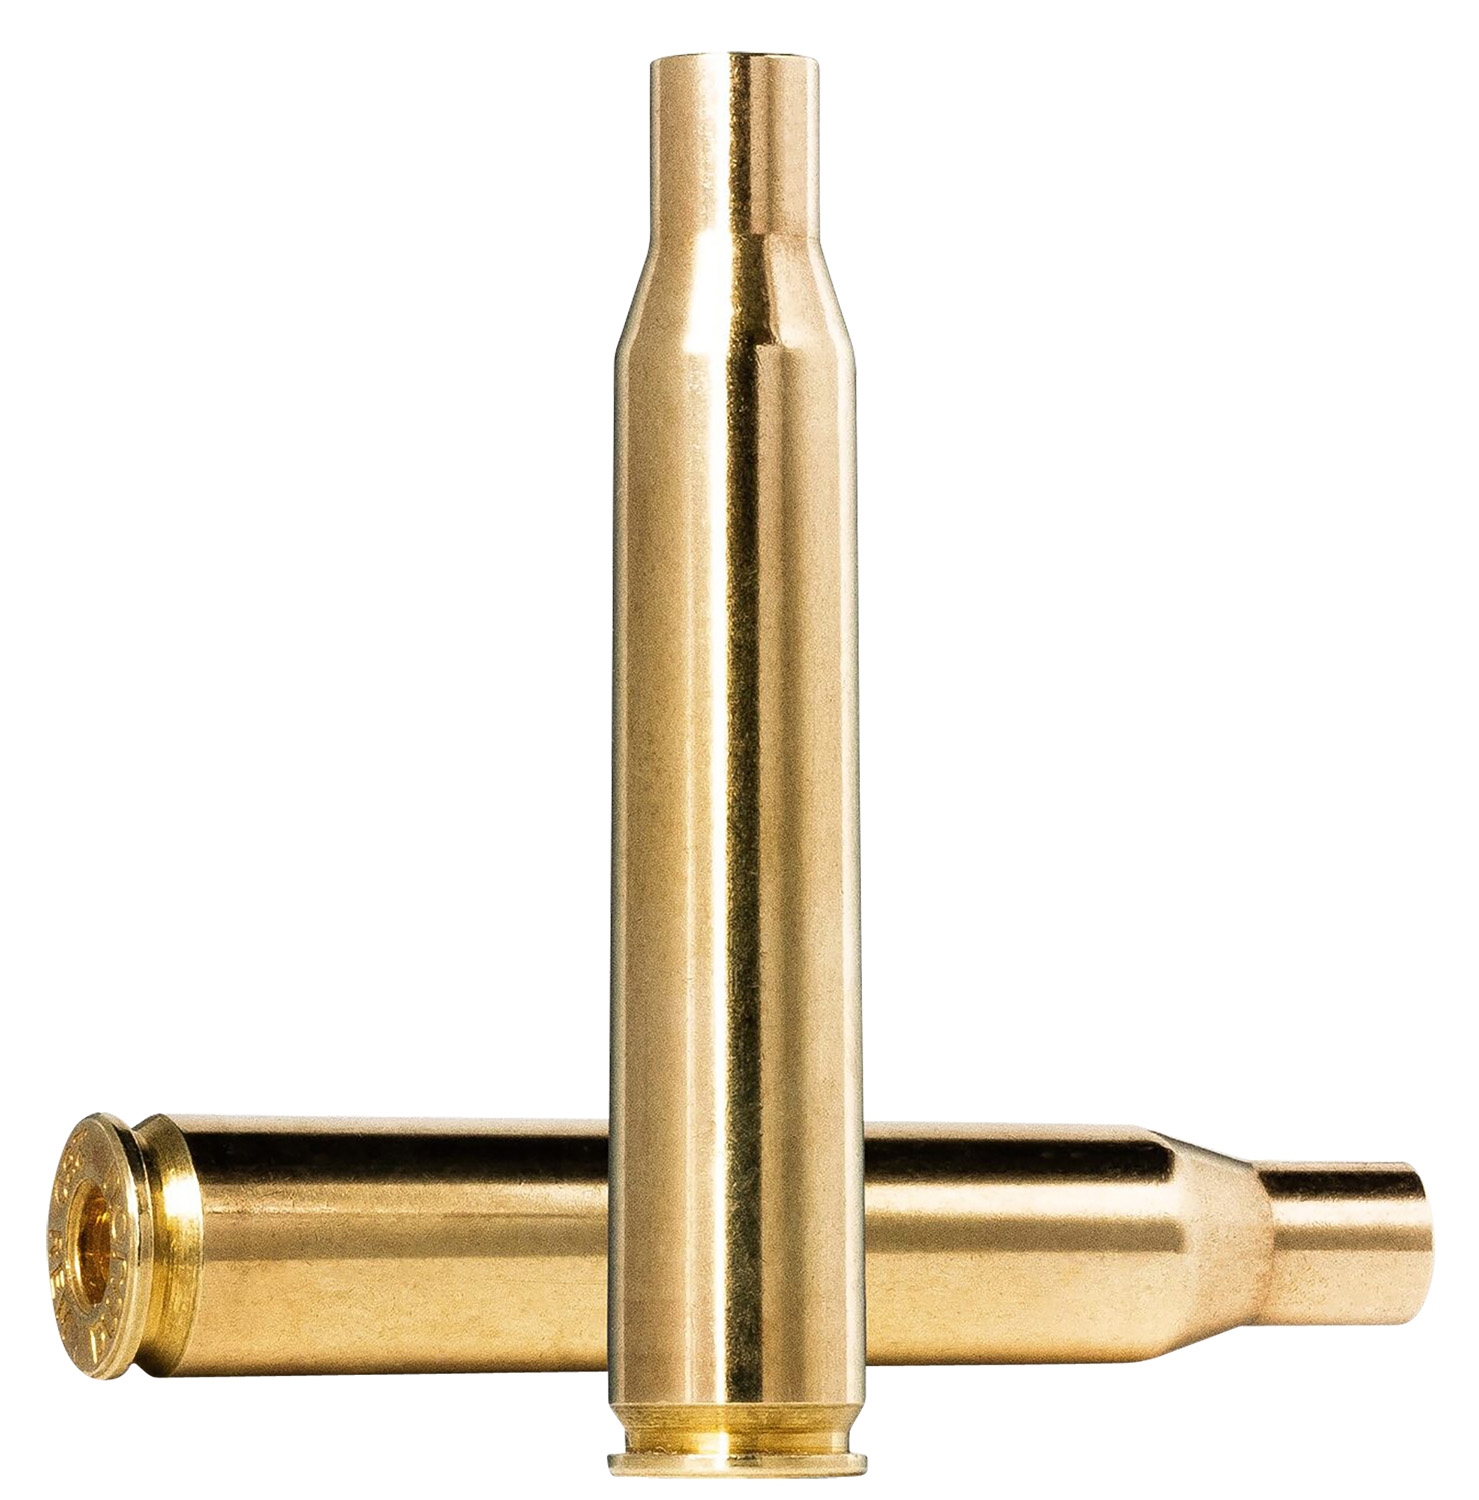 Norma Ammunition 20265287 Dedicated Components Reloading 6.5-284 Norma Rifle Brass